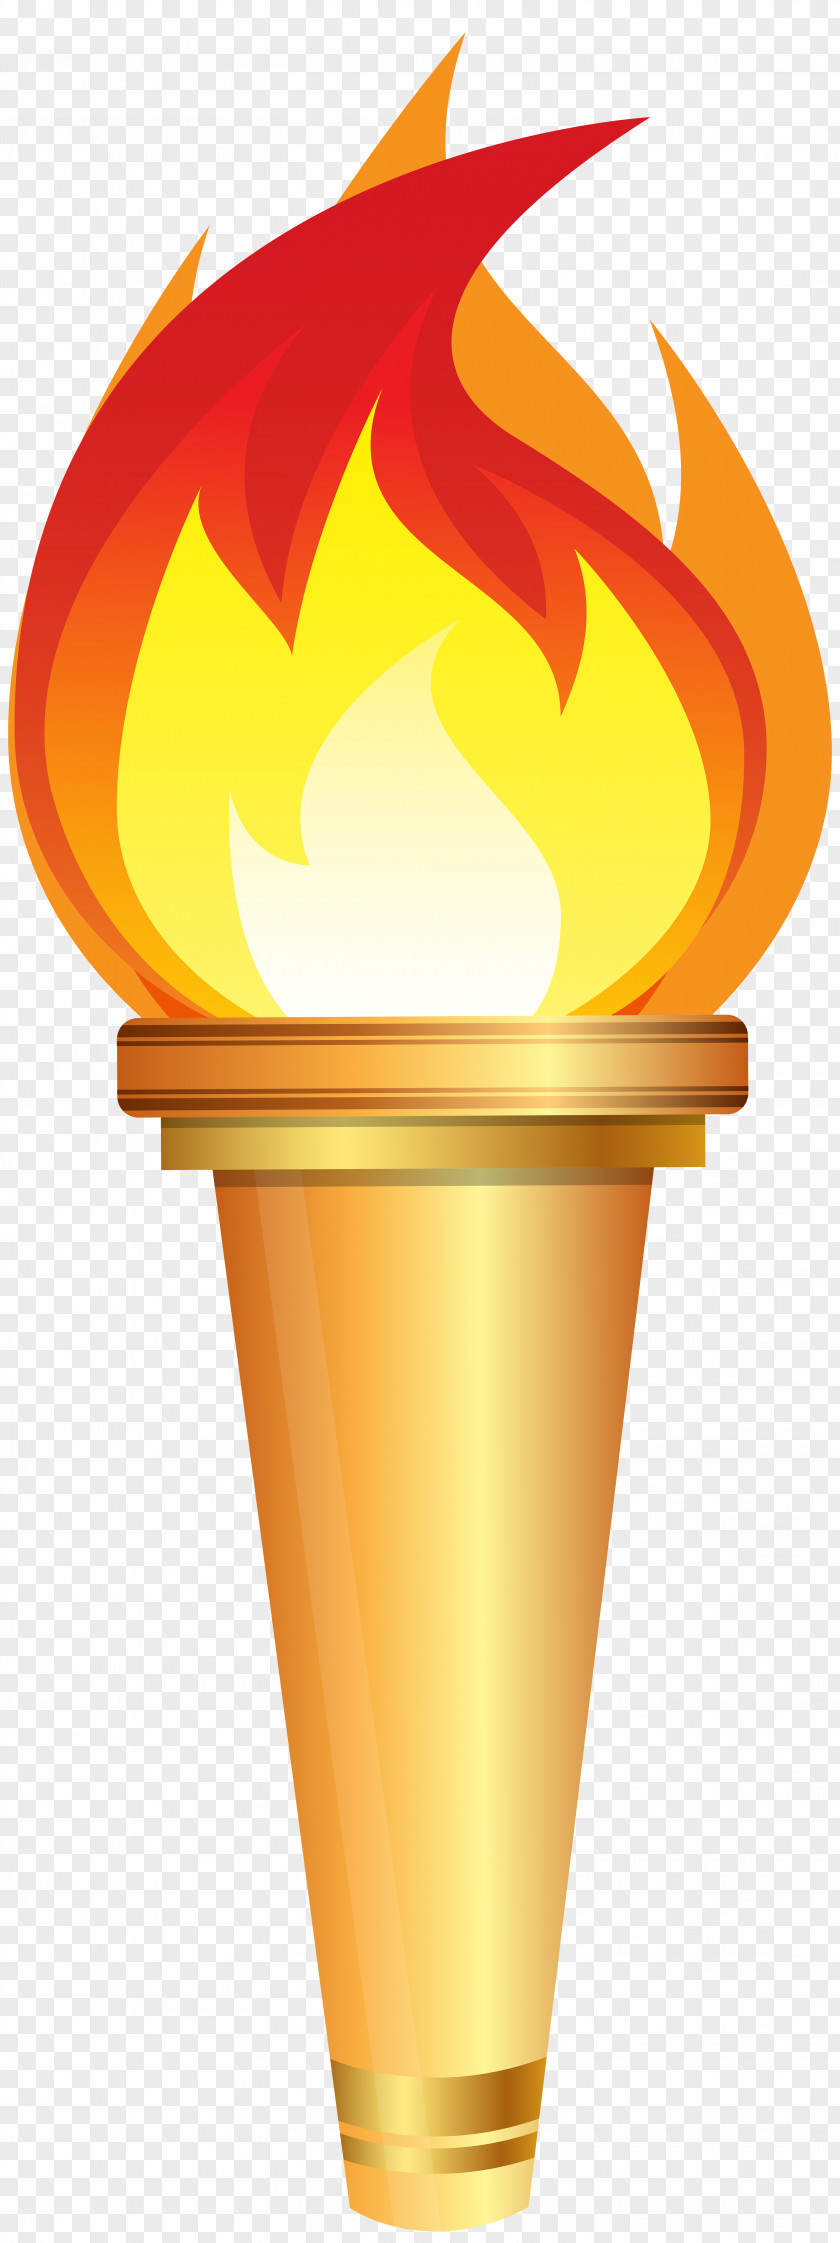 Flame 2018 Winter Olympics Torch Relay Olympic Games 2016 Summer Clip Art PNG